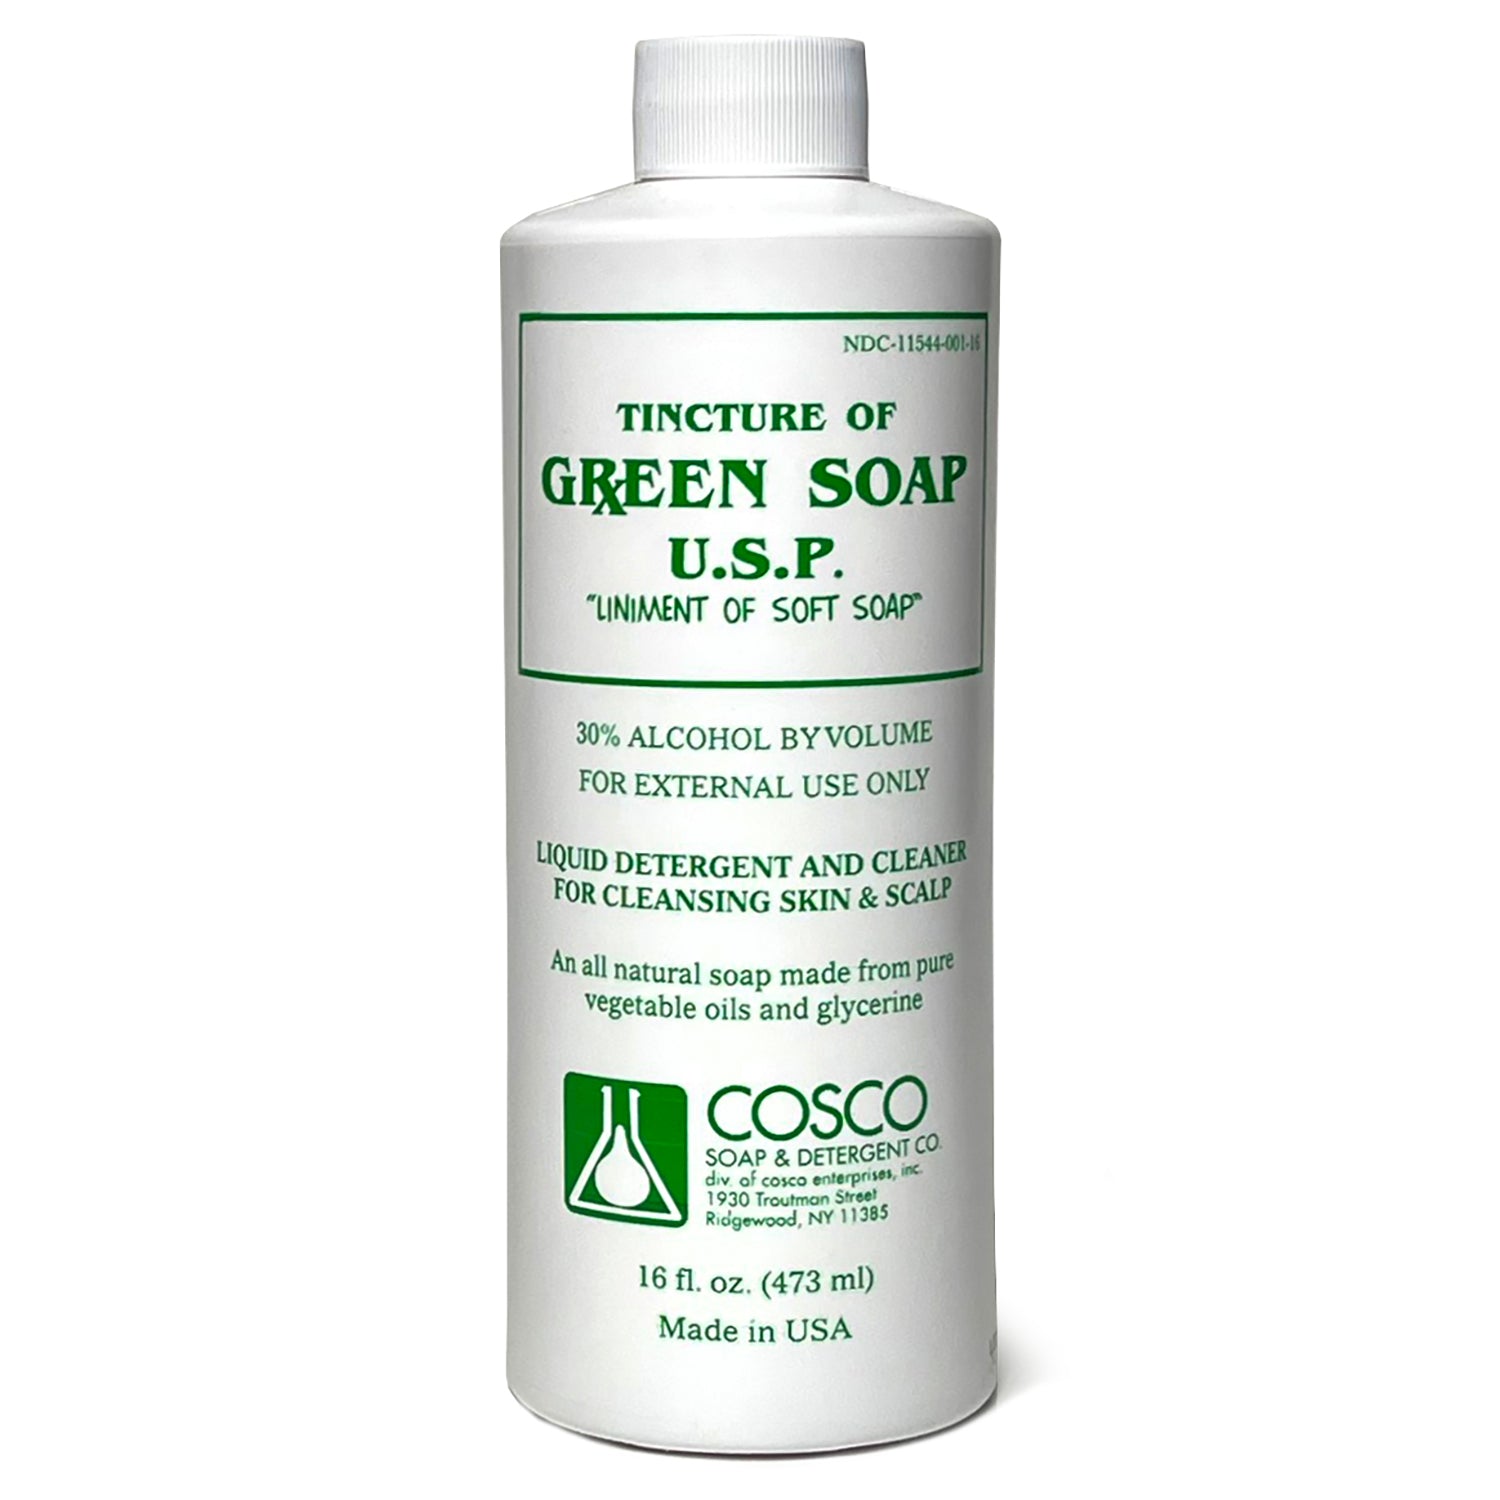 Cosco Tincture of Green Soap Twin USP Medical Tattoo Cleanser 16 Fluid  Ounce  Green soap tattoo Green soap Soap